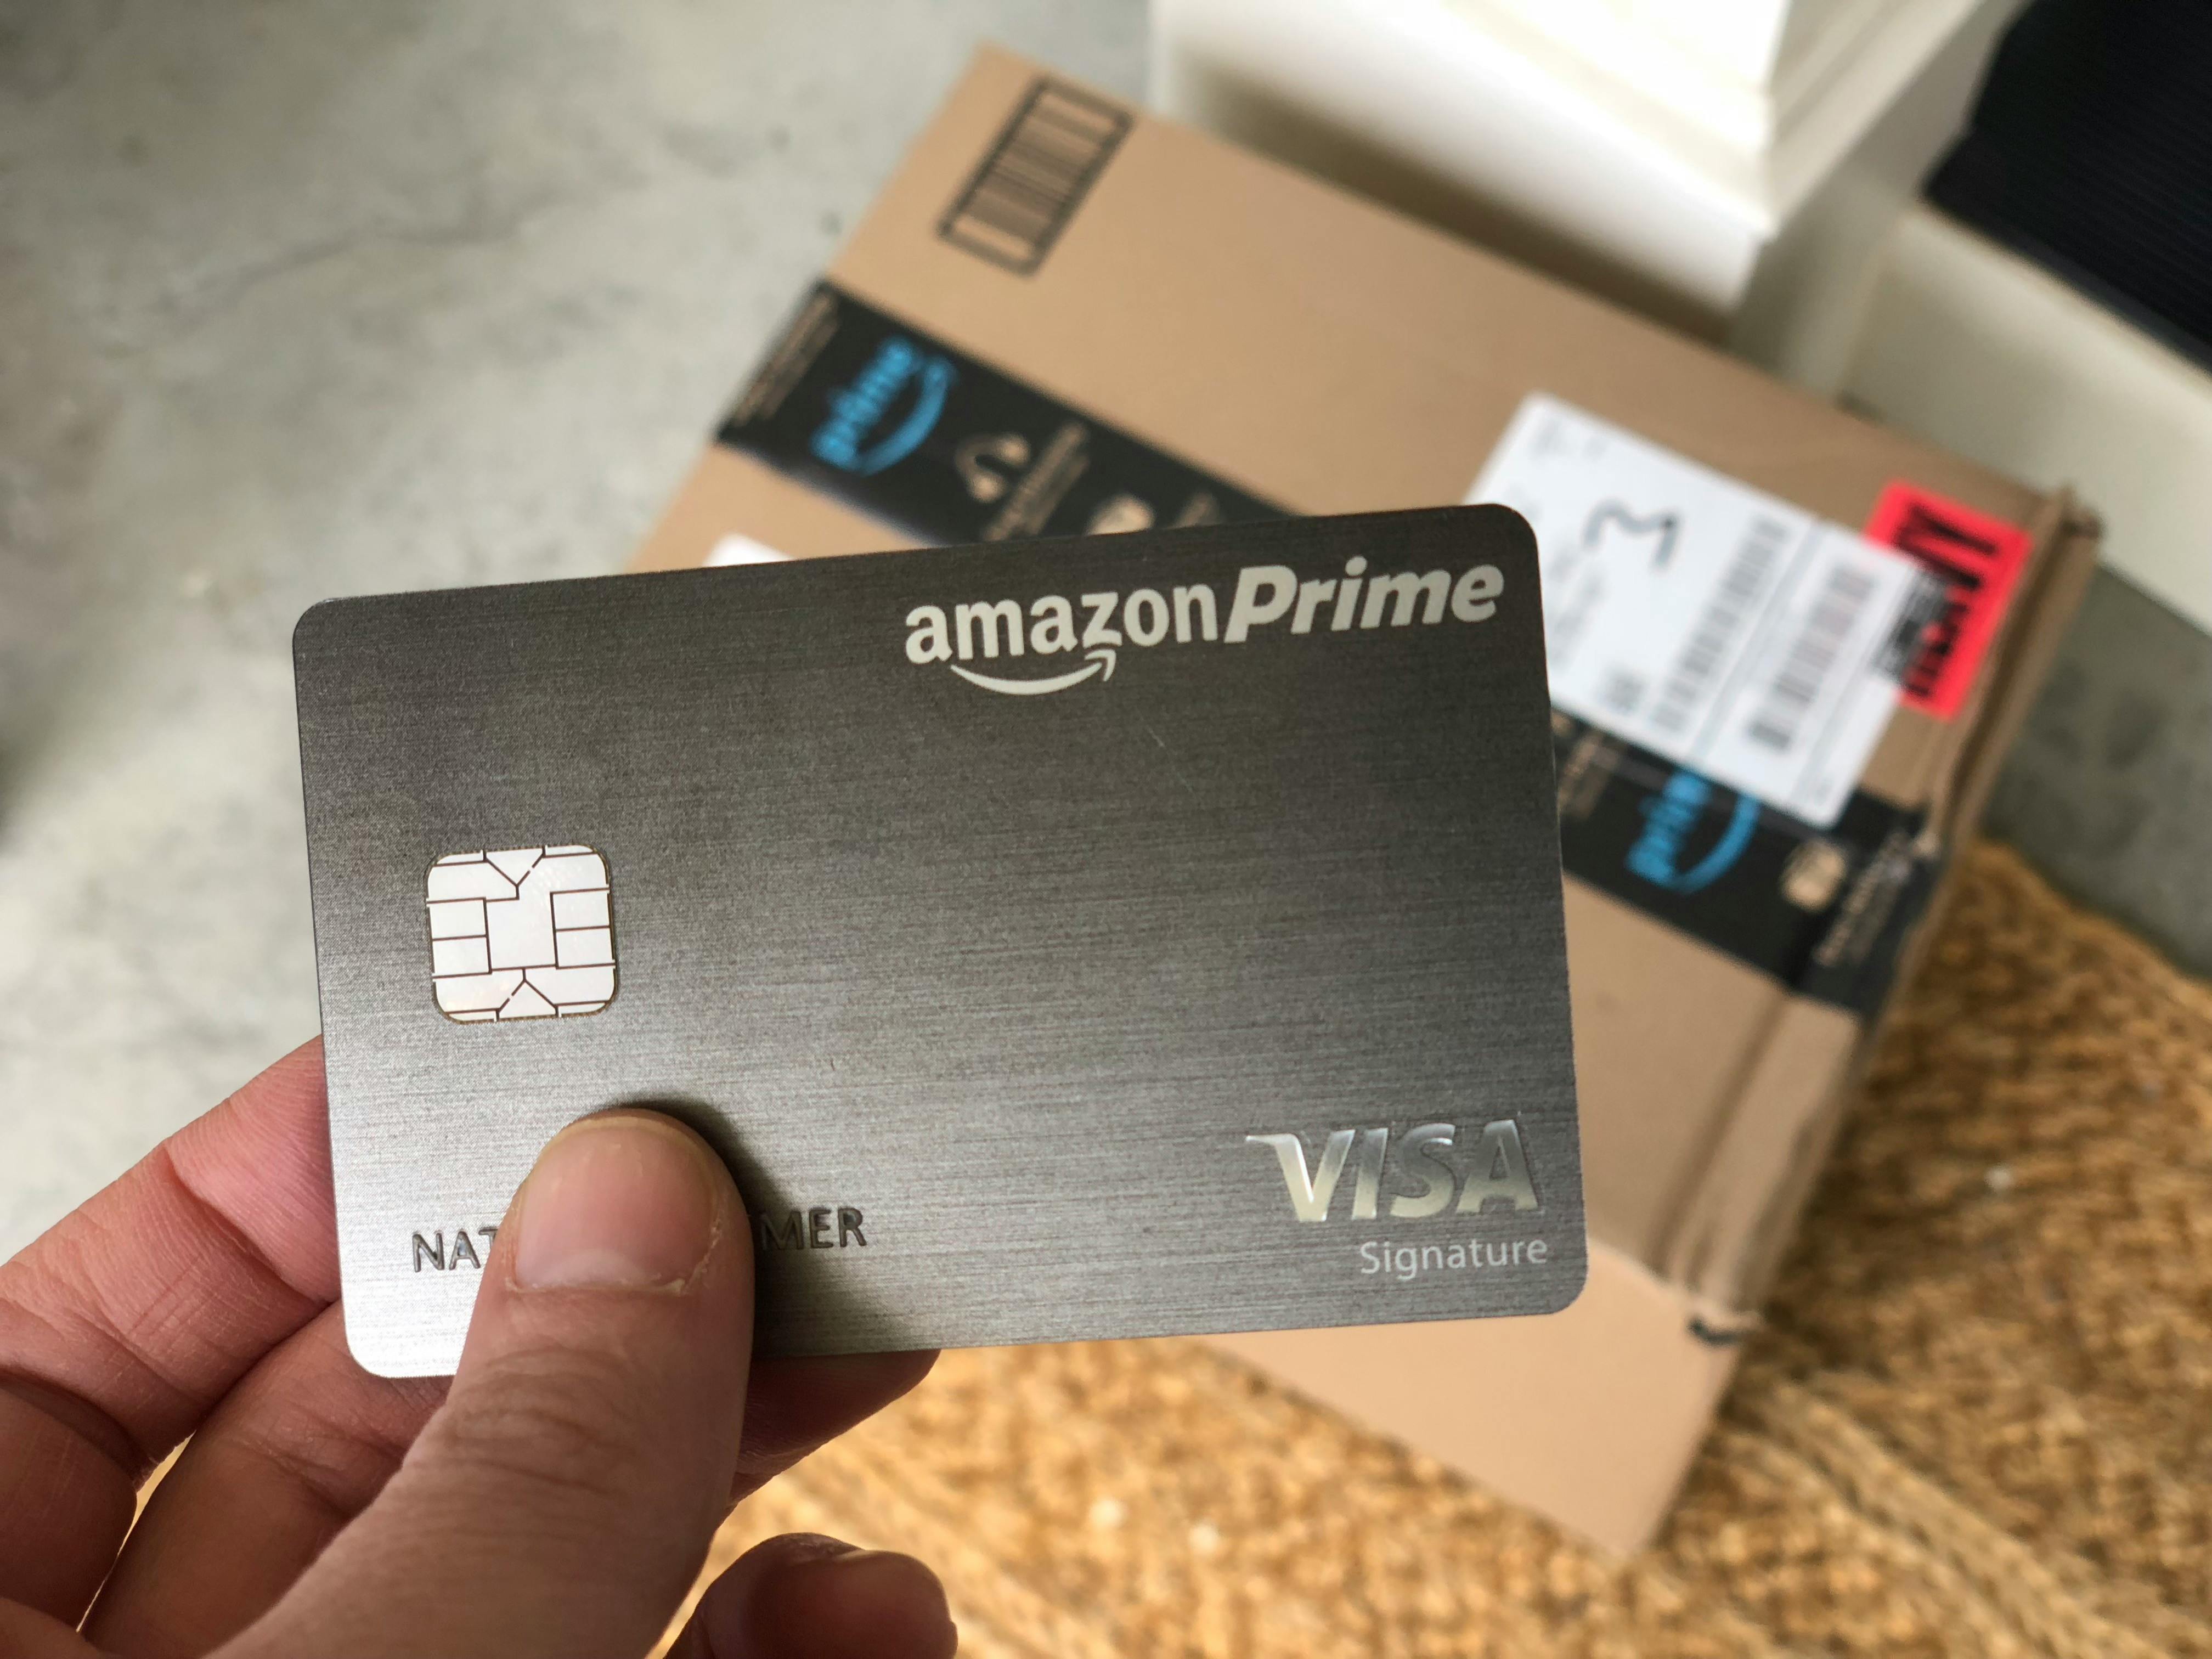 An Amazon Prime credit card held with an Amazon box on a doorstep in the background